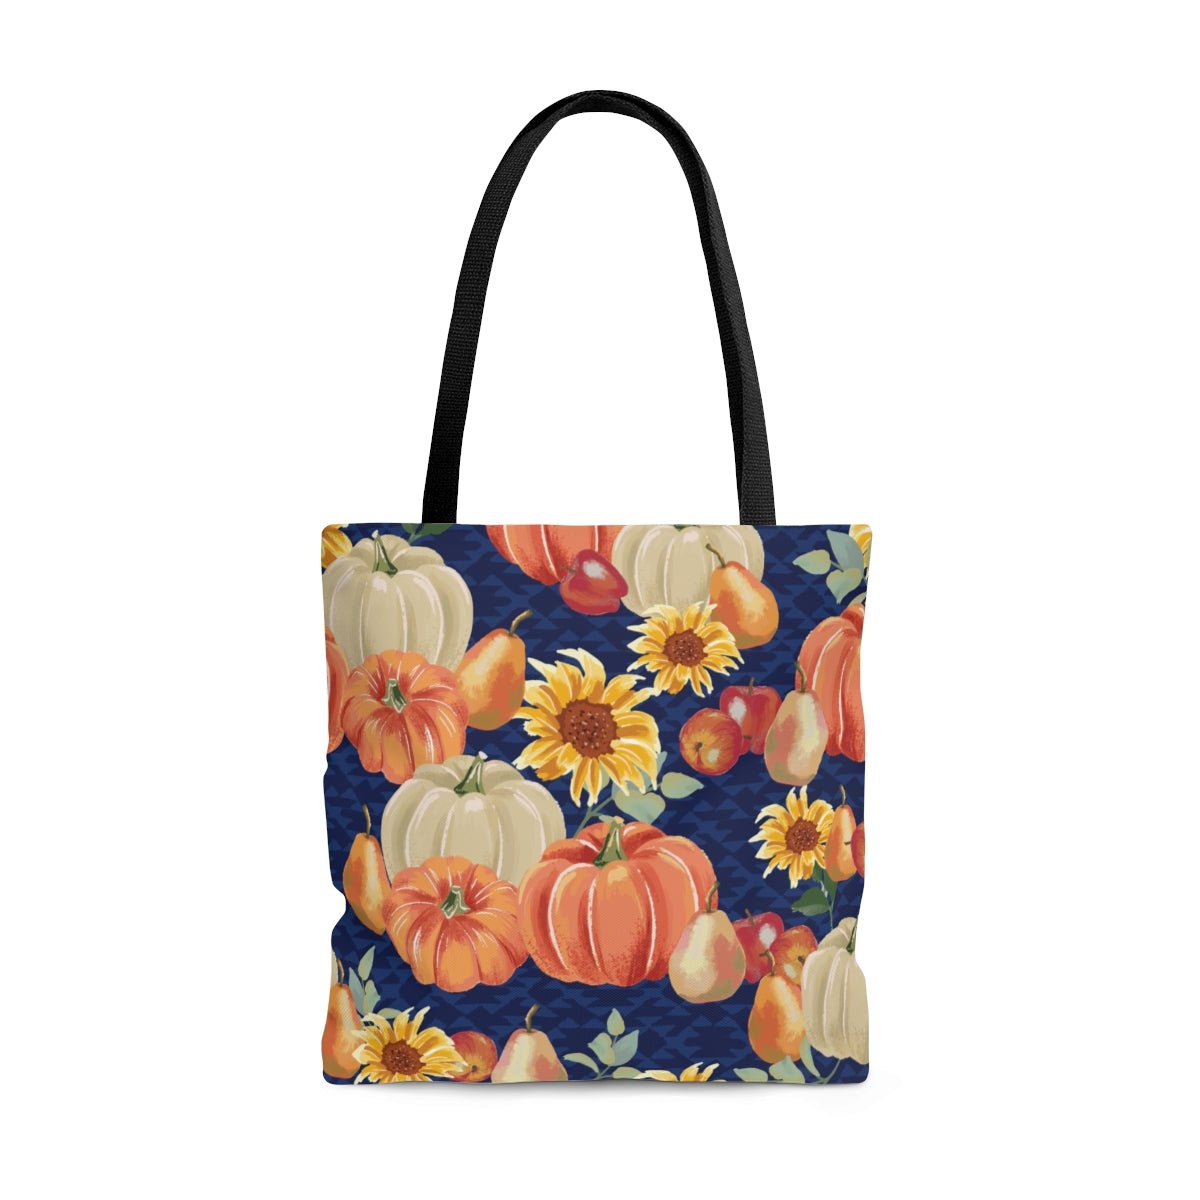 Fall Pumpkins and Sunflowers Tote Bag - Puffin Lime